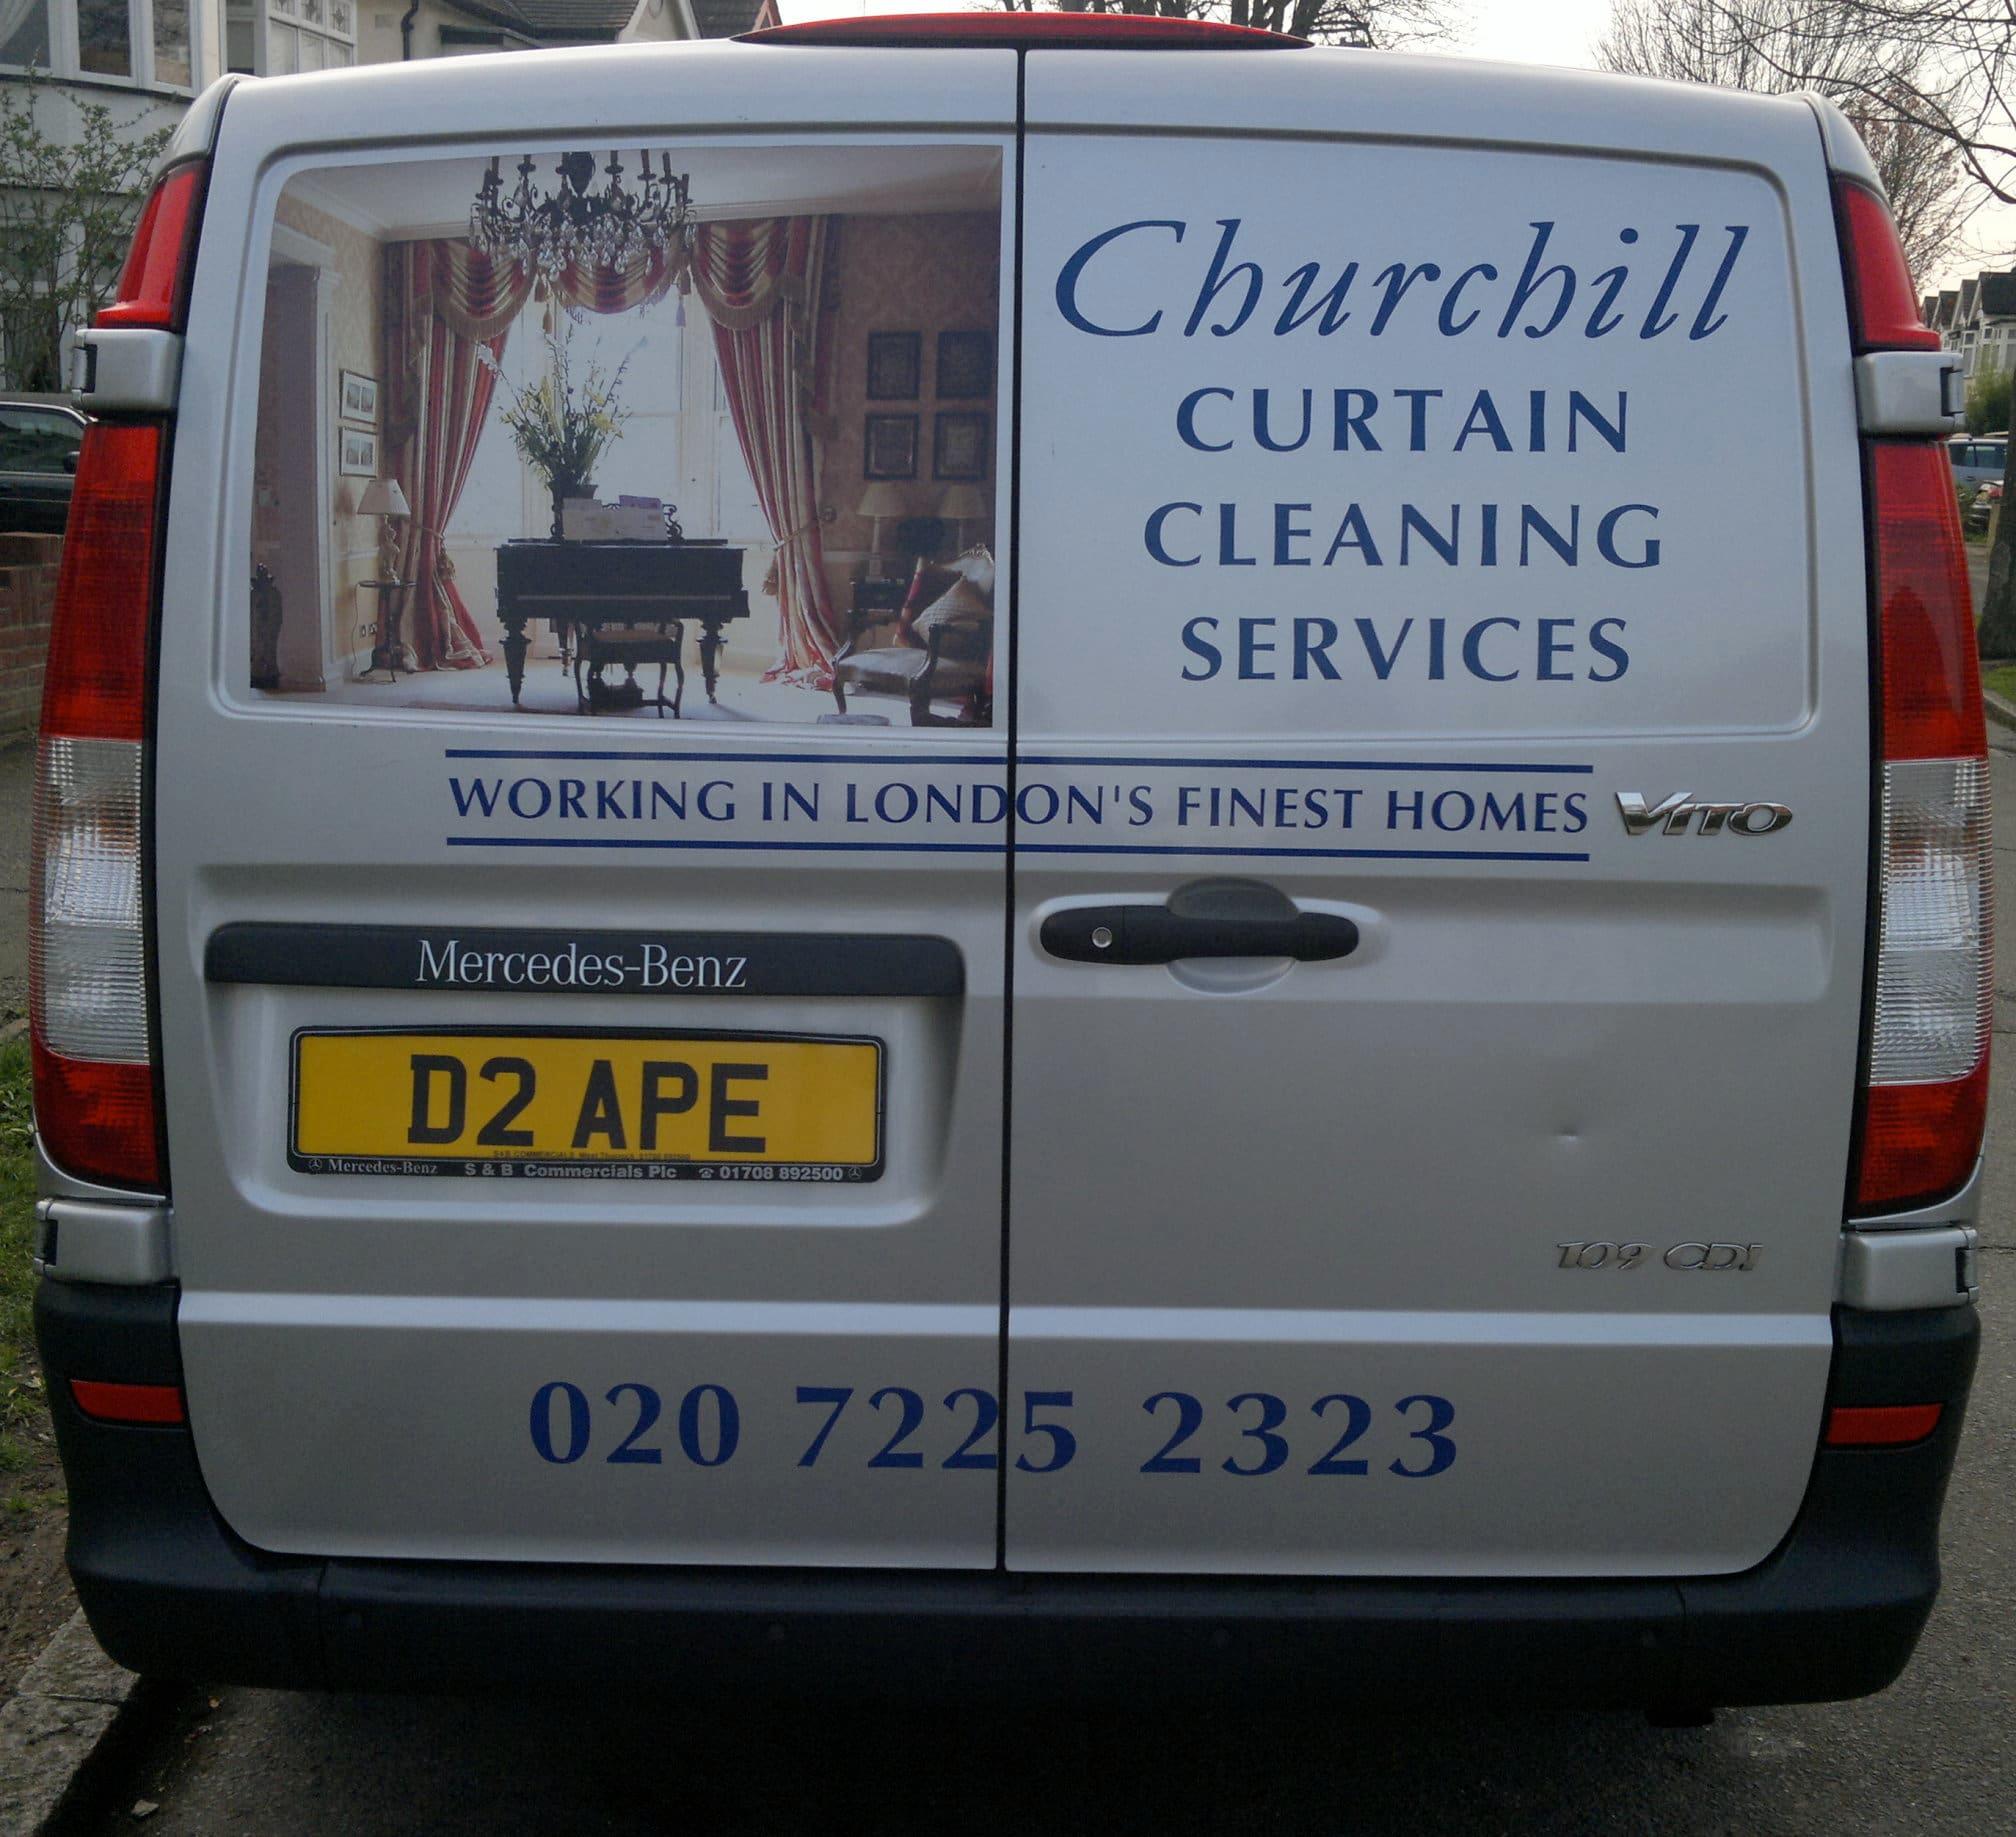 Images Churchill Curtain Cleaning Services